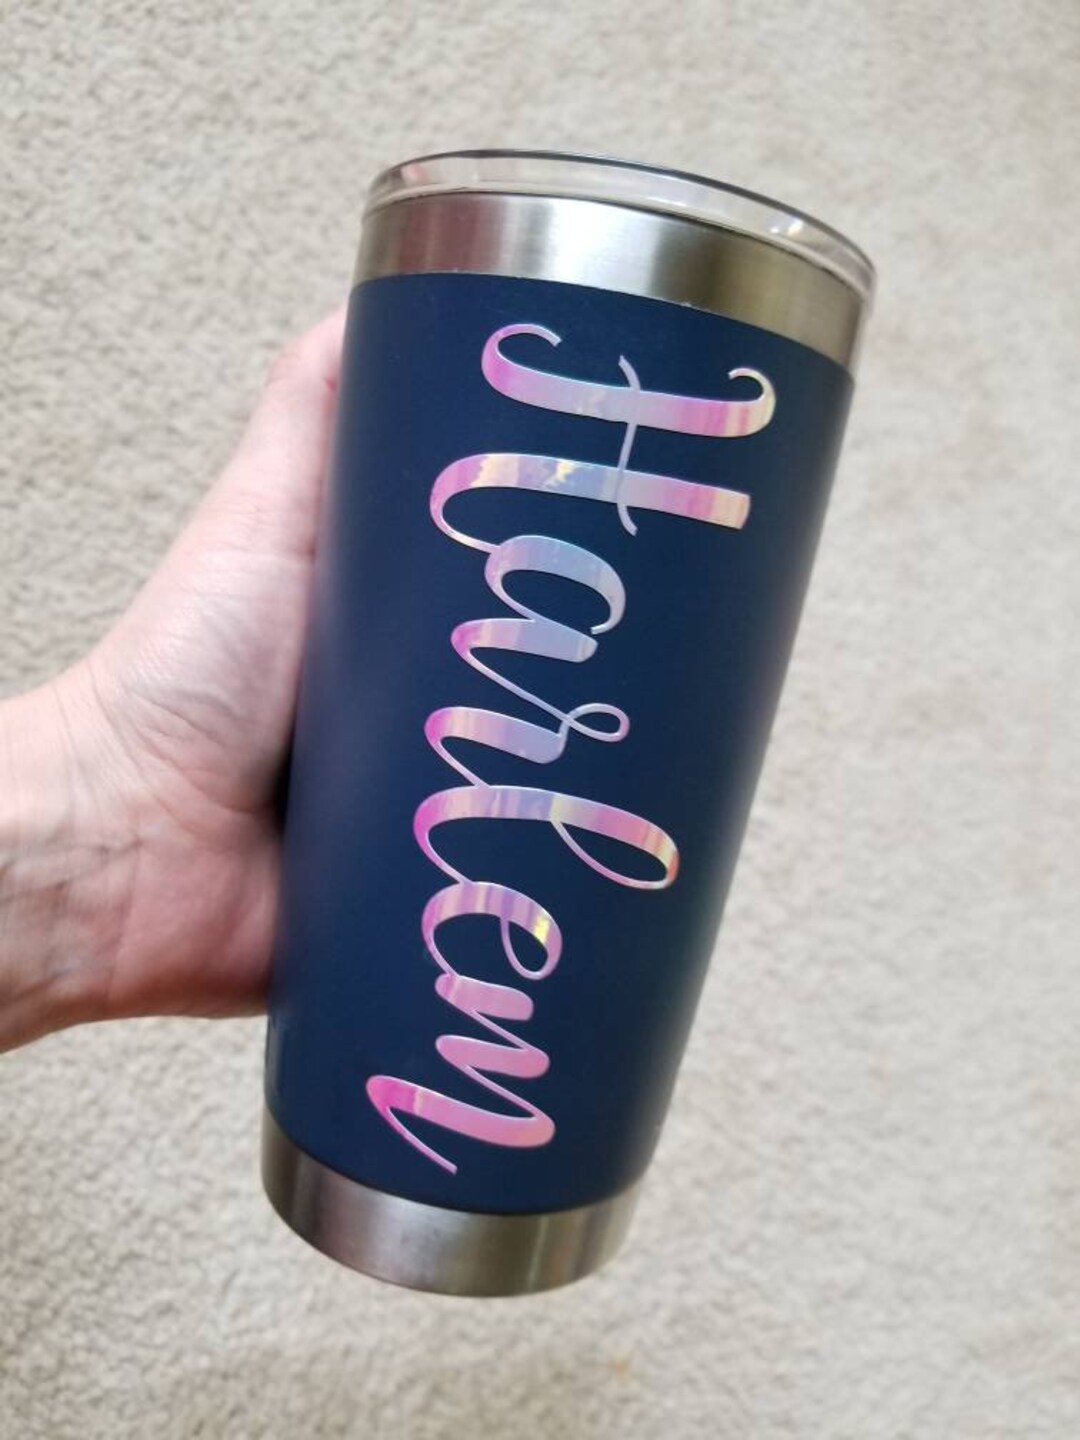 Holographic Name Decal Holographic Decal Name Sticker - Etsy